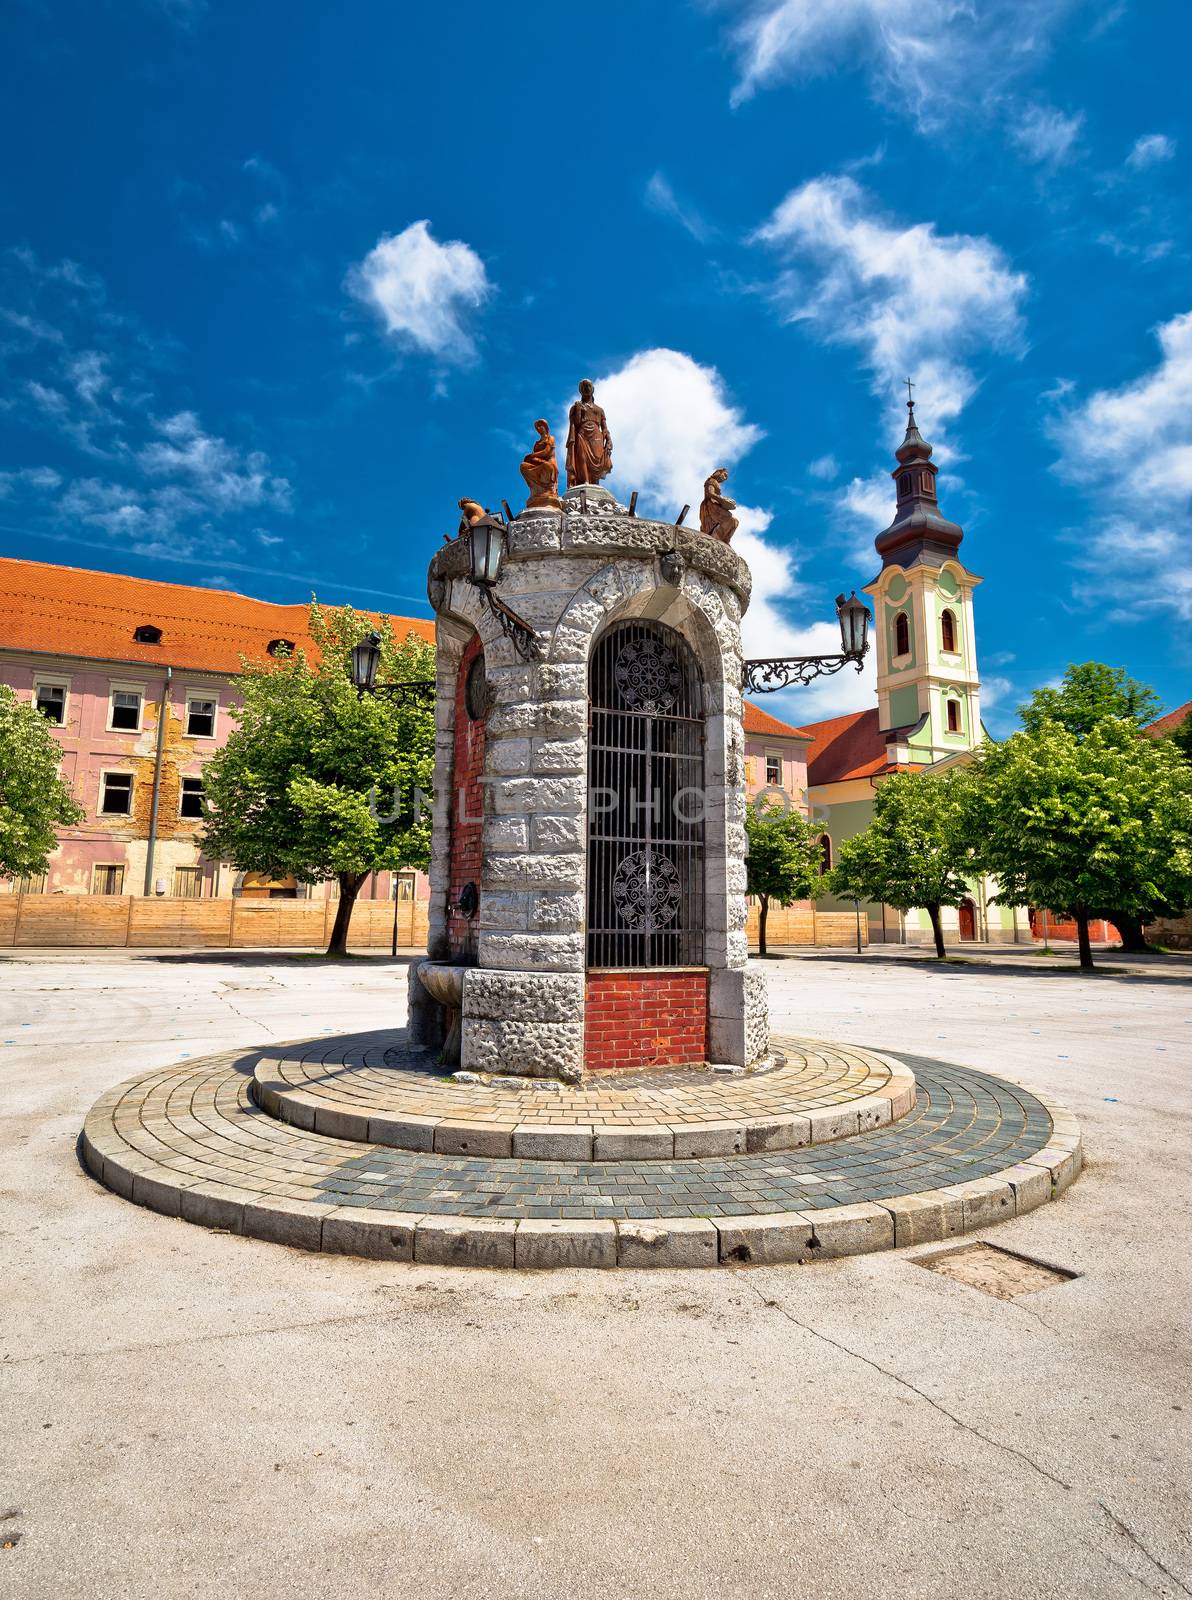 Town of Karlovac central square view by xbrchx